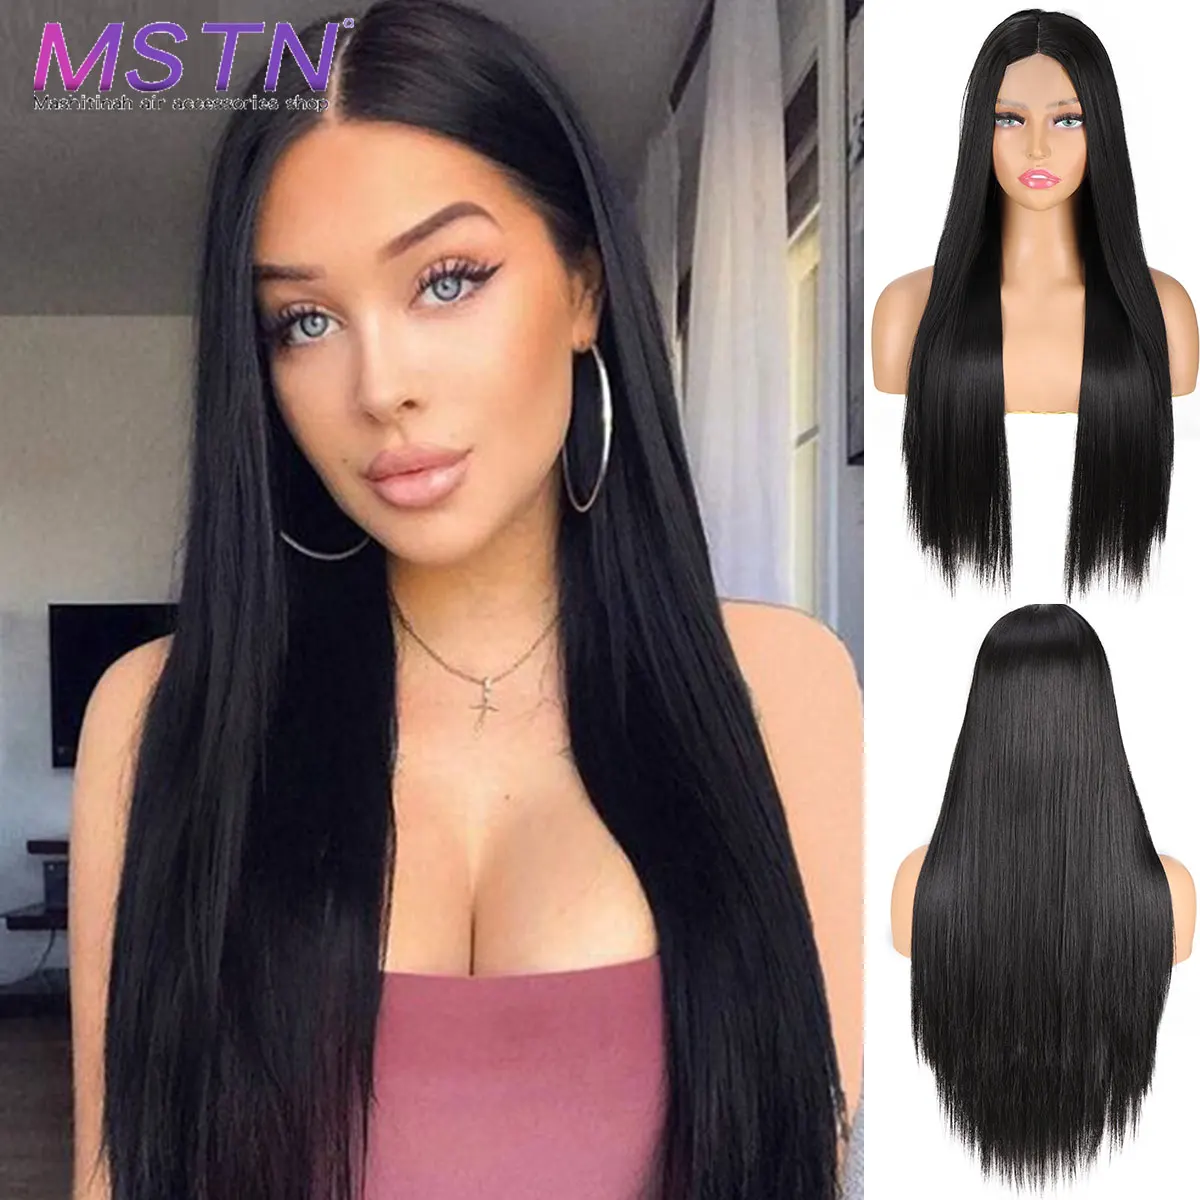 

MSTN Synthetic Ladies Wig Front Lace Wig Long Straight Hair Wig Black Gold Mixed Cosplay Heat-resistant Chemical Fiber